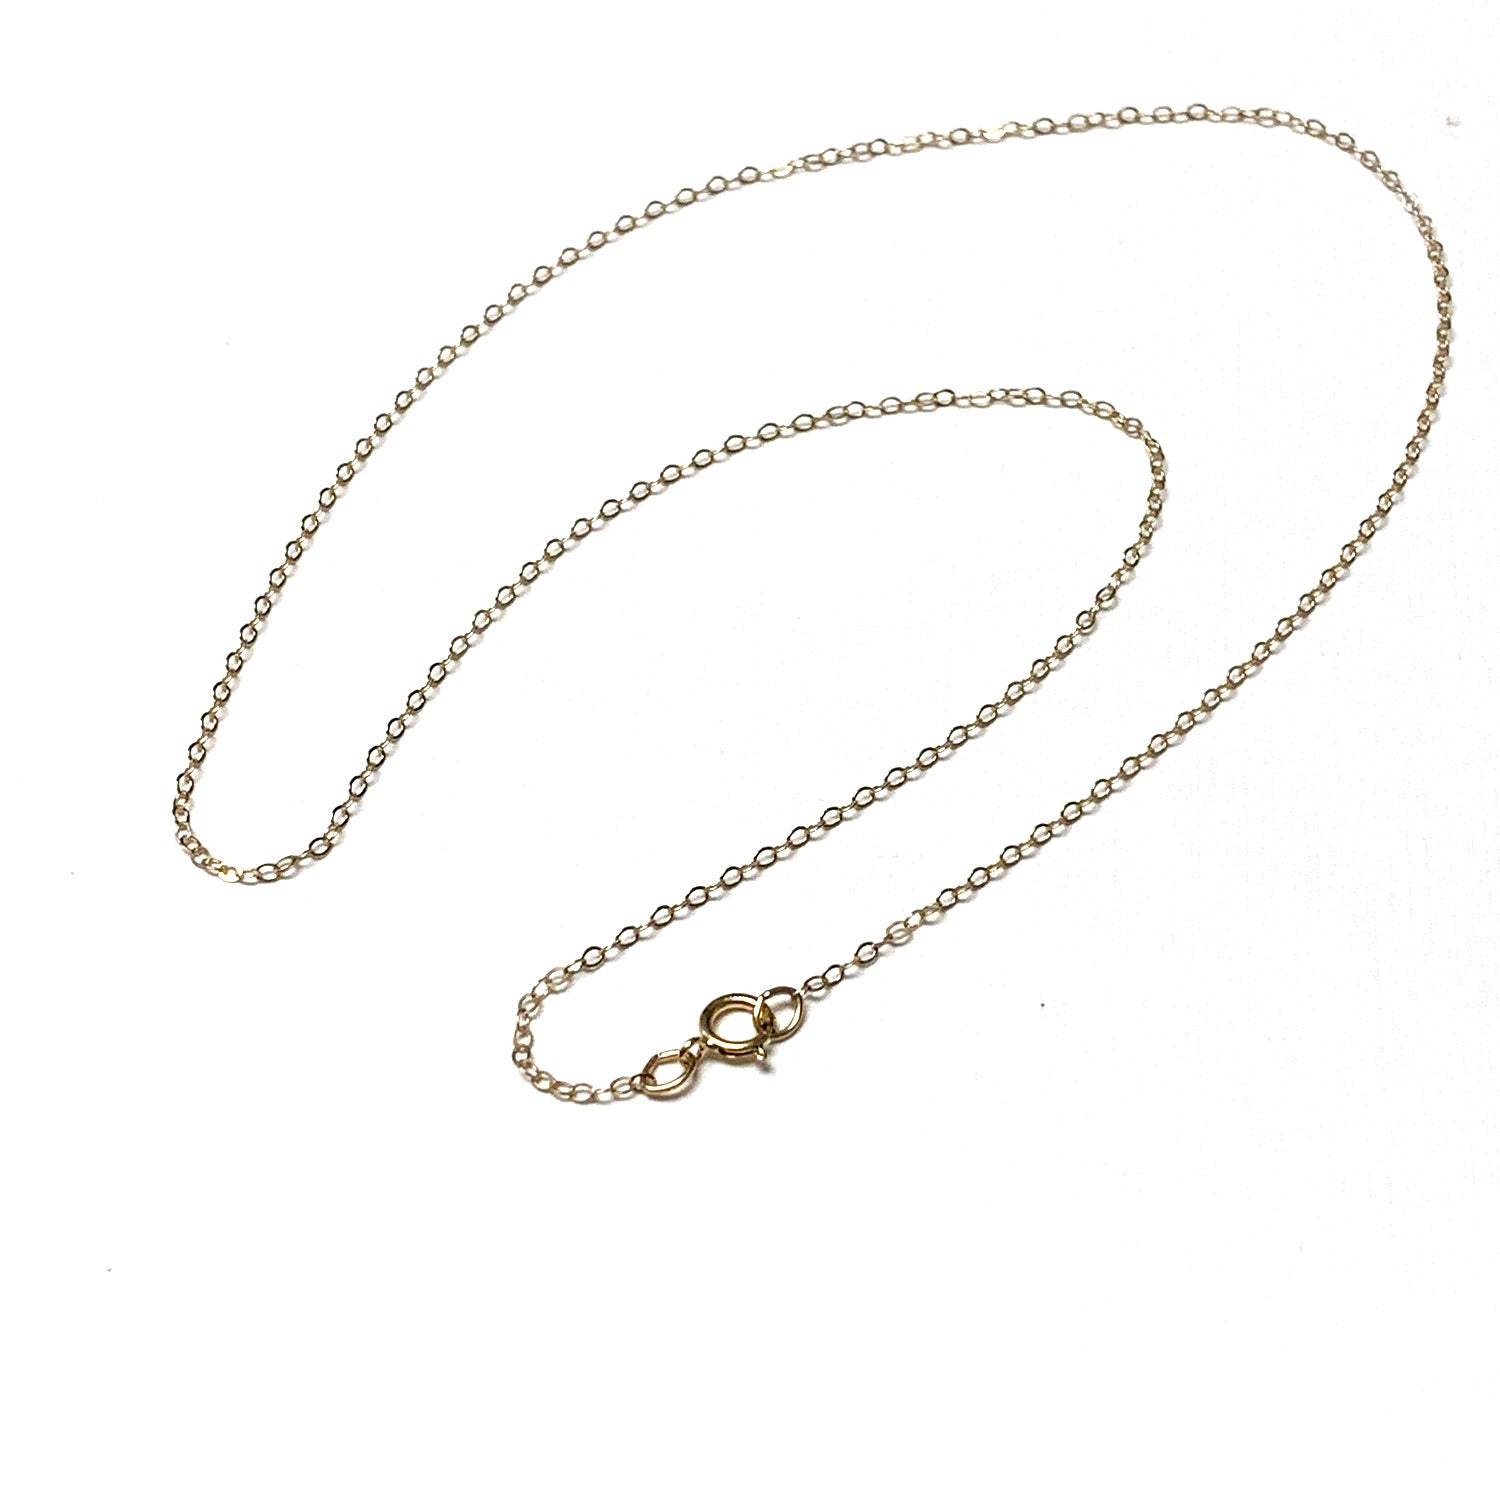 GOLD FILLED FLAT CABLE CHAIN 16, 18, 20 INCHES